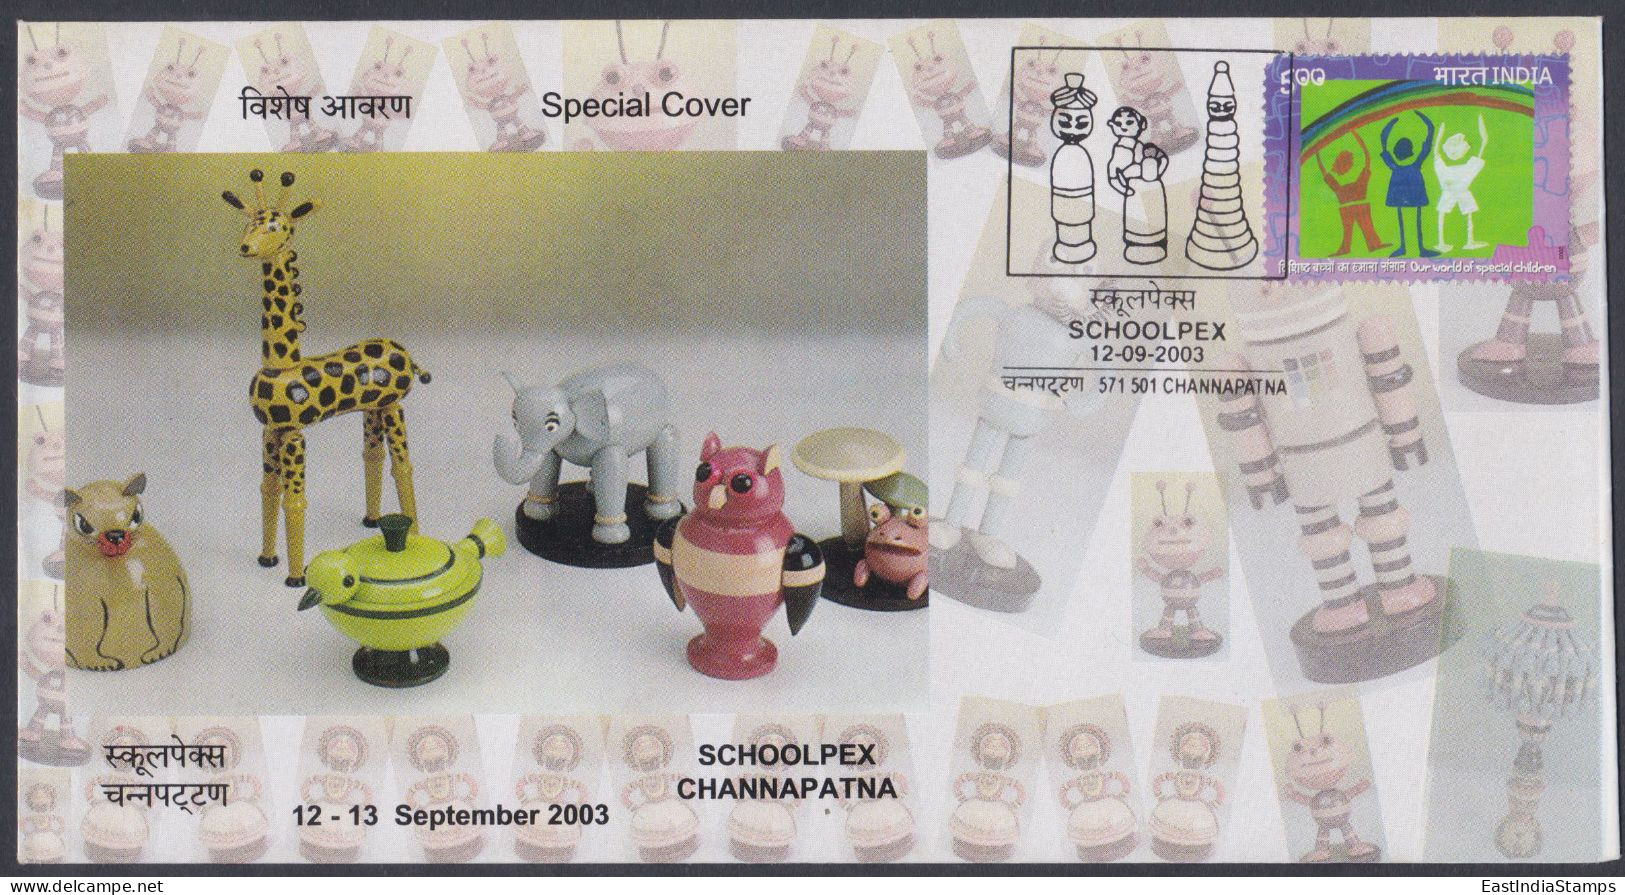 Inde India 2003 Special Cover Schoolpex Stamp Exhibition, Toys, Children, Toy, Giraffe, Elephant, Pictorial Postmark - Lettres & Documents